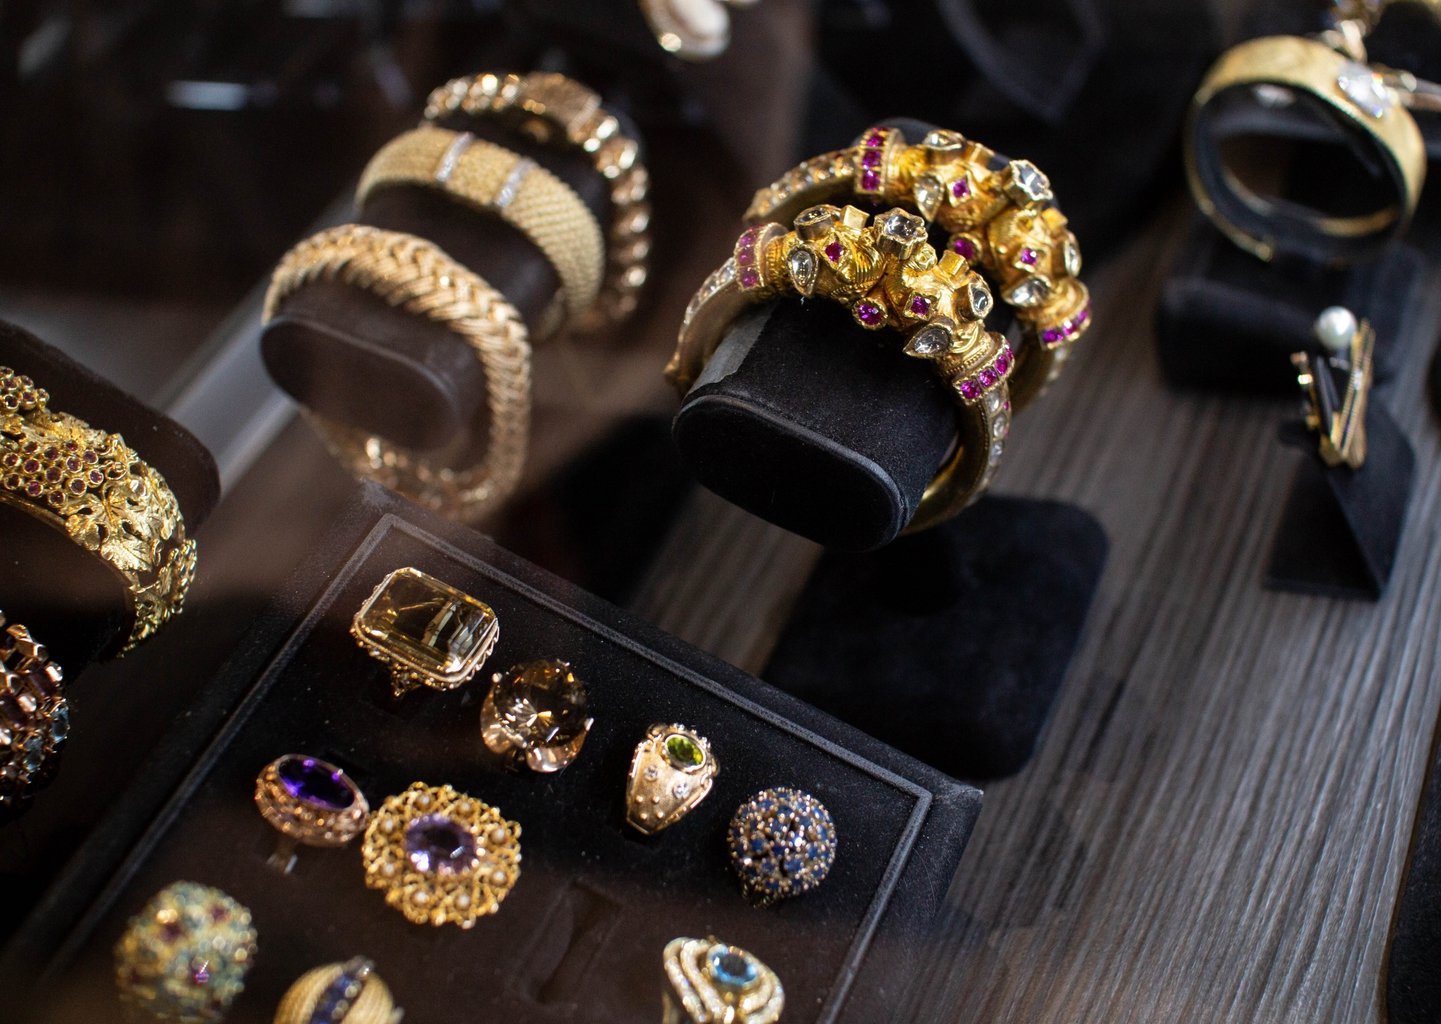 Pawn Shop VS Jewelry Store - Where Will You Find the Best Deal